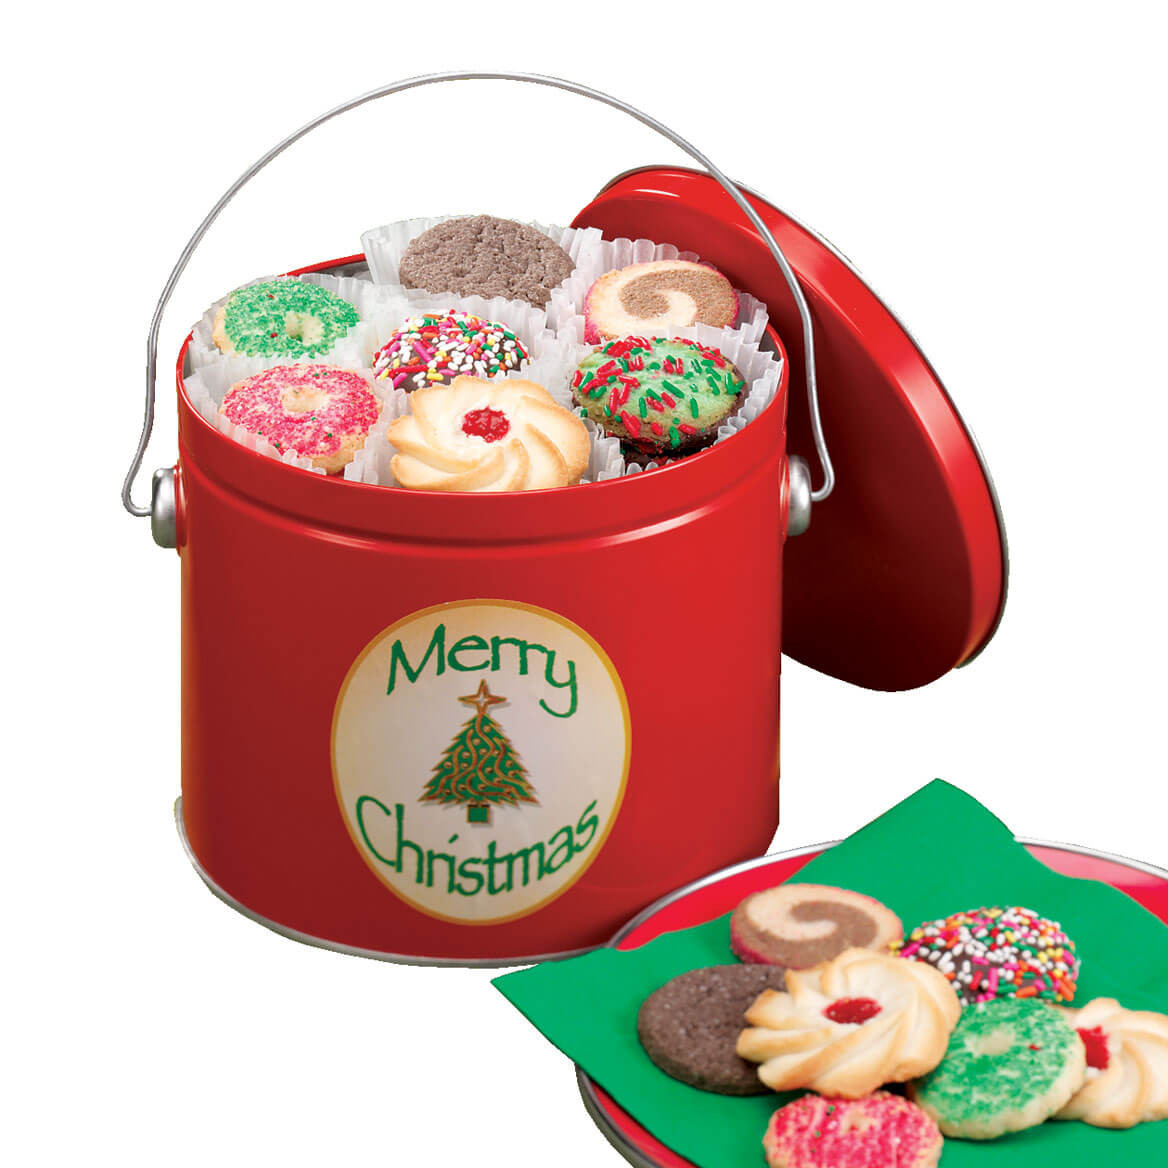 Christmas Cookies In A Tin
 Christmas Cookie Tin Christmas Cookies In A Tin Miles